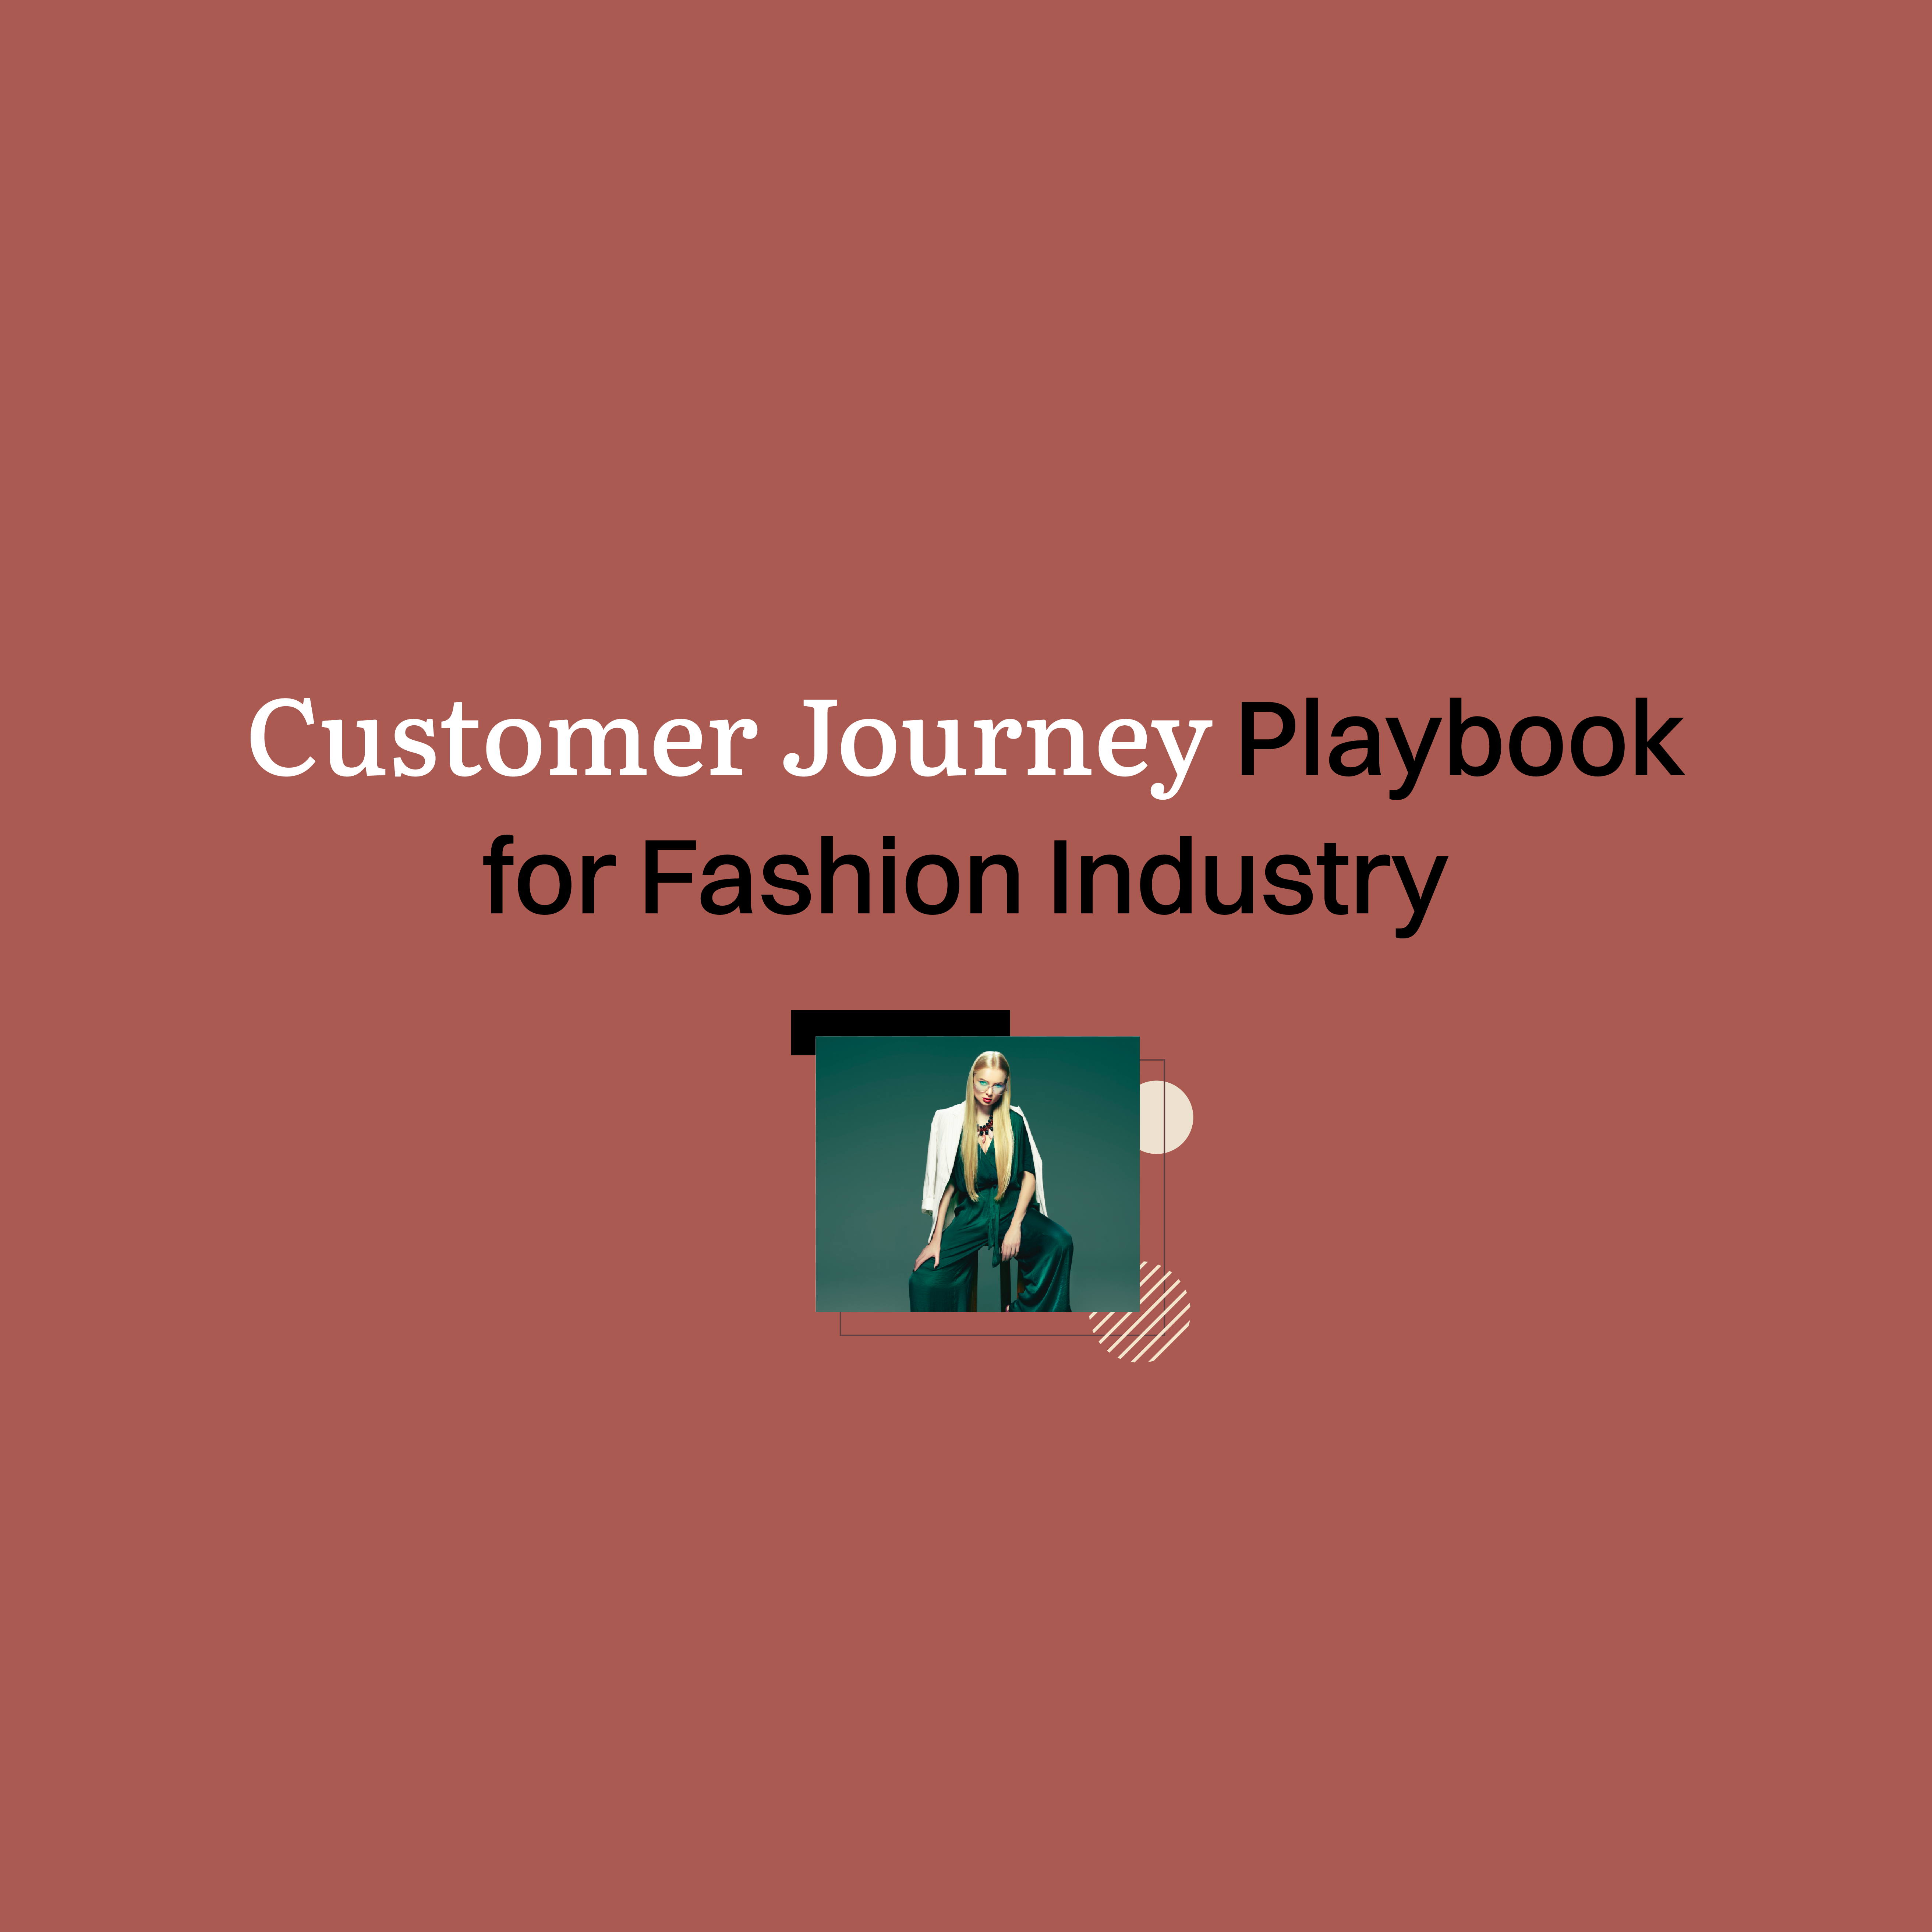 How to Build Customer Journeys for the Fashion Industry